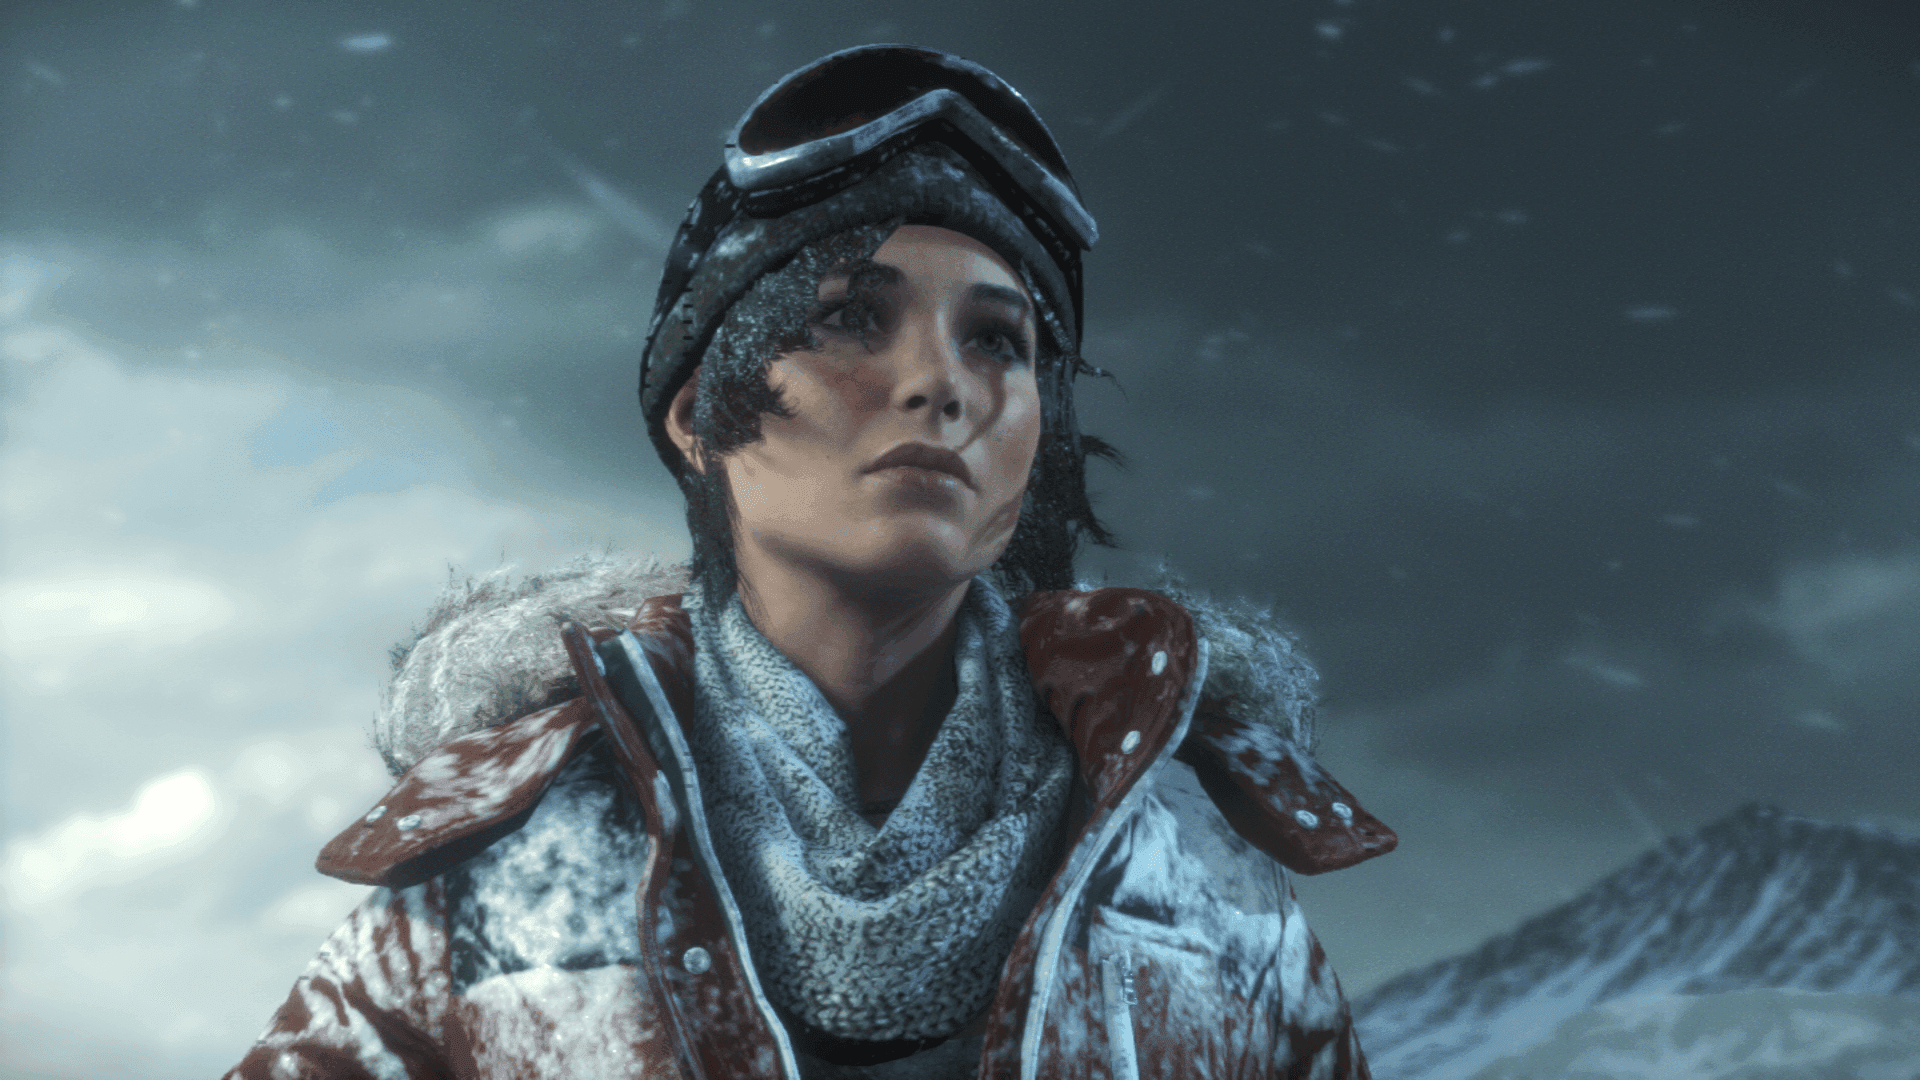 A close-up of a Lara Croft wearing a snow-covered jacket and goggles, with a snowy mountain landscape in the background.